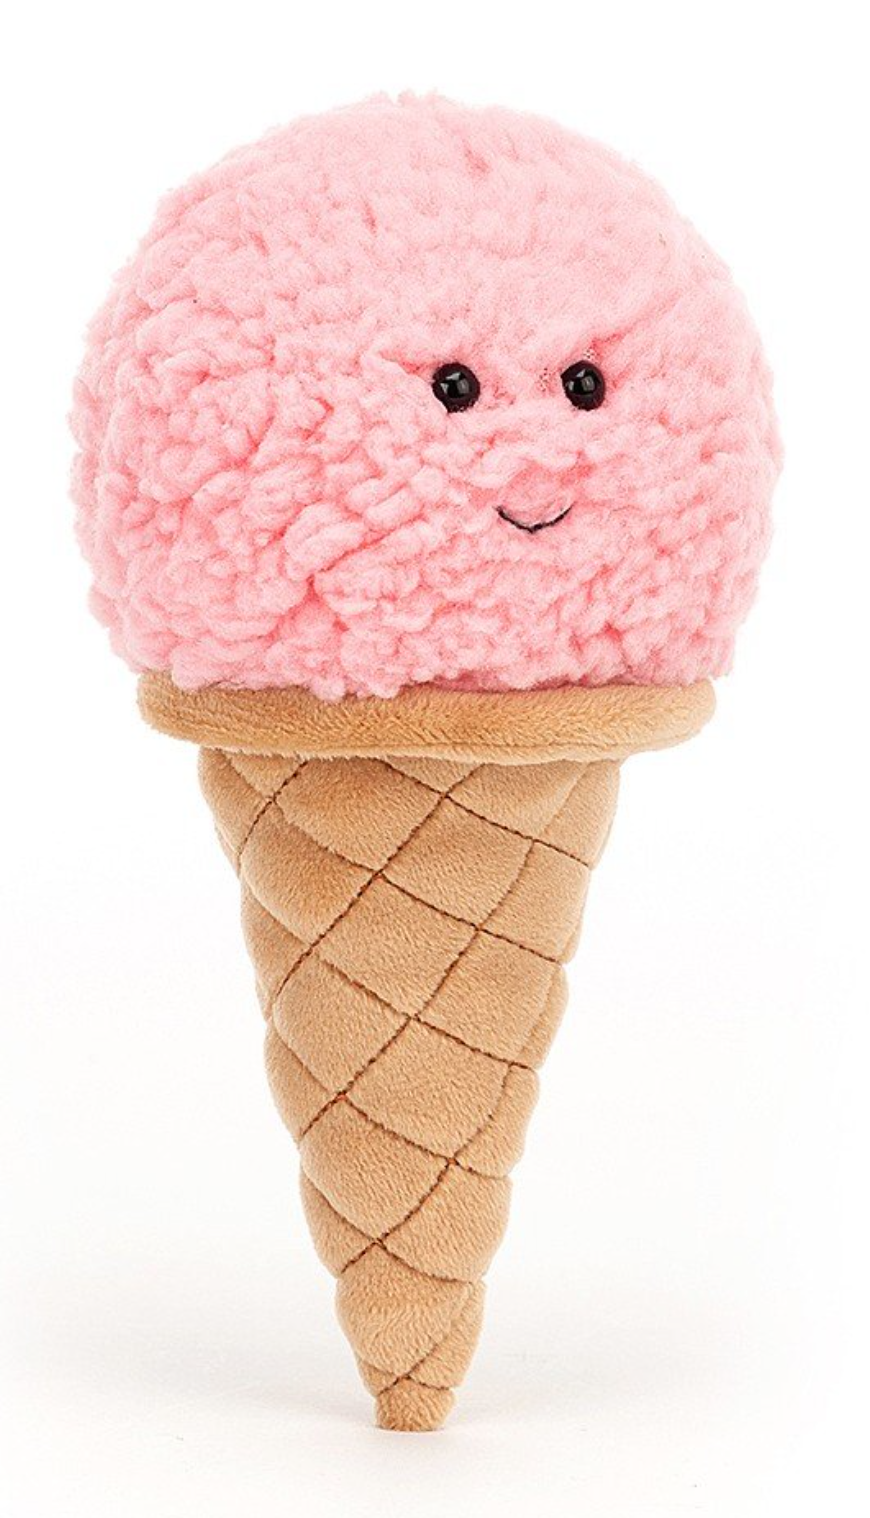 Jellycat: Irresistible Ice Cream - Assorted Colors (7")